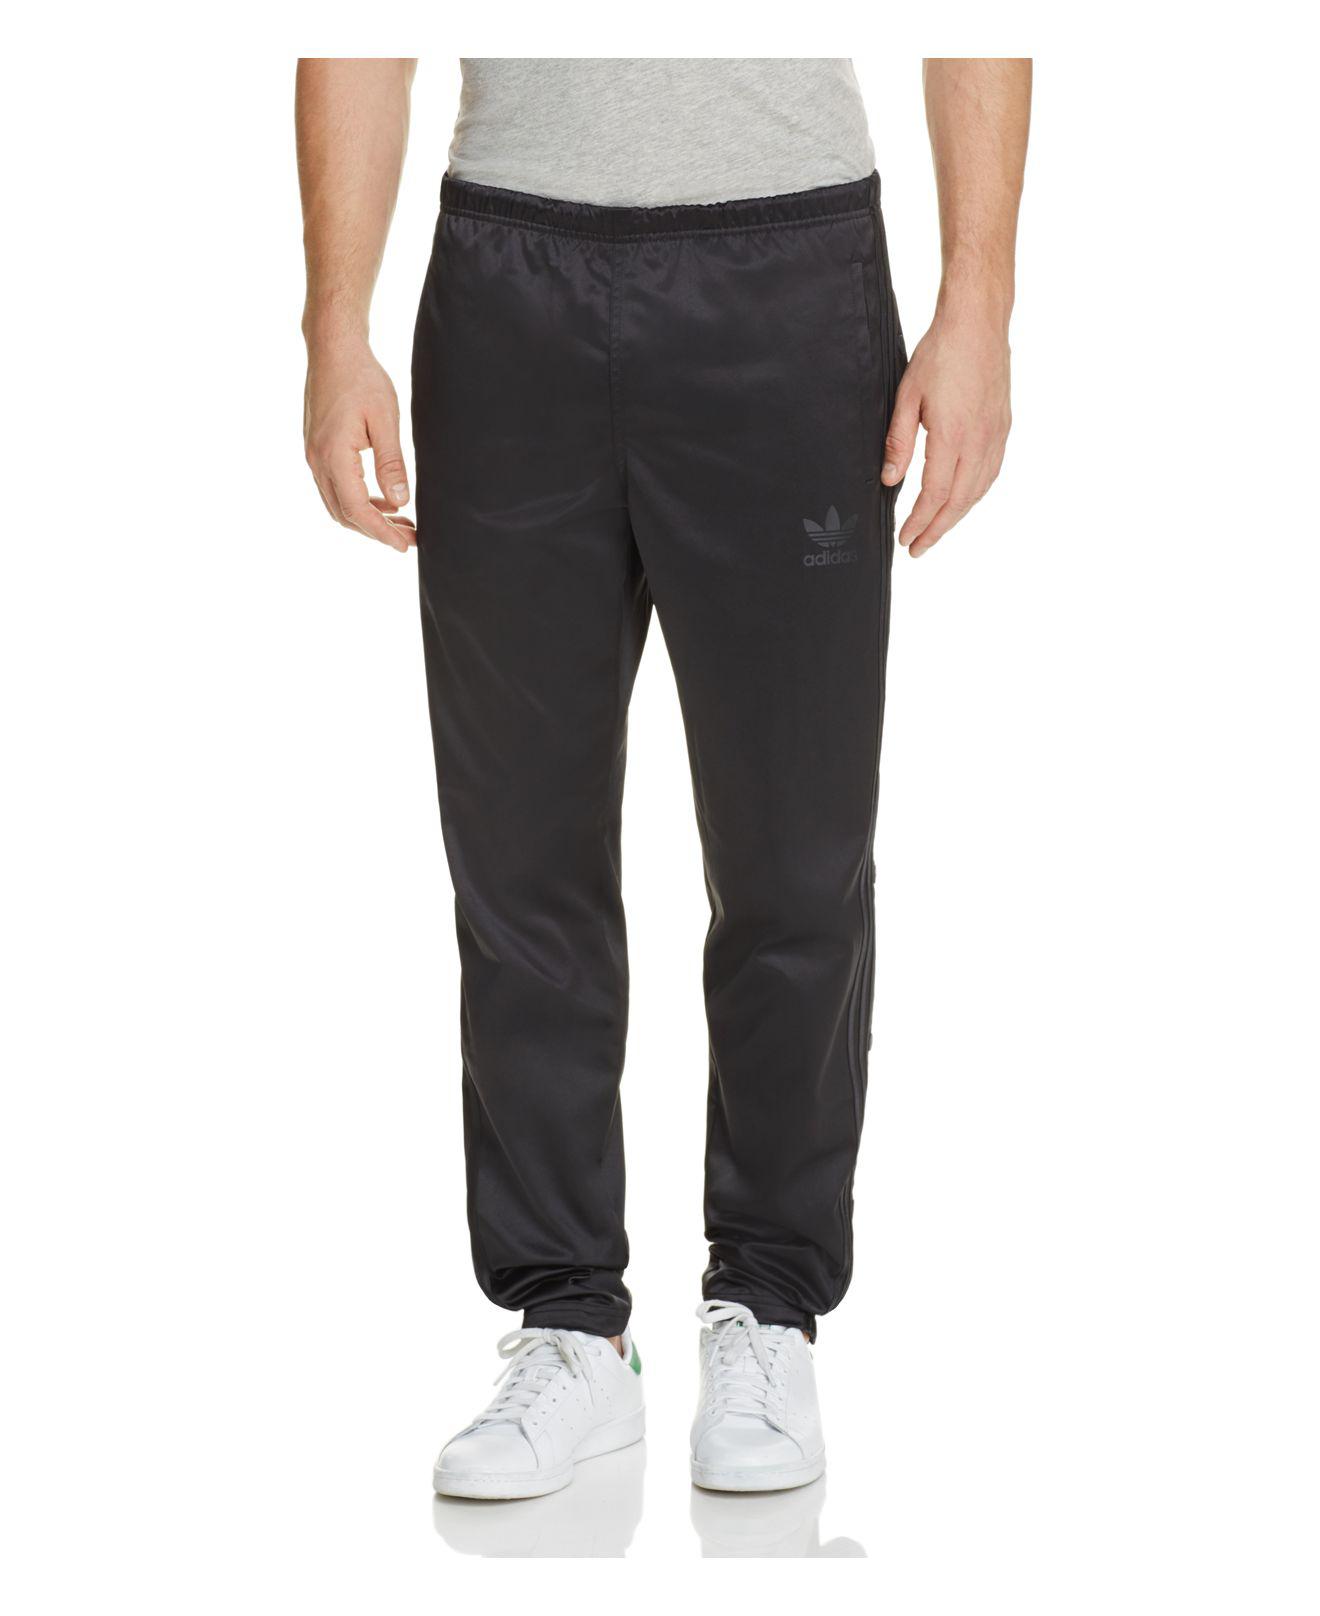 adidas Originals Synthetic Side Snap Track Pants in Black for Men - Lyst